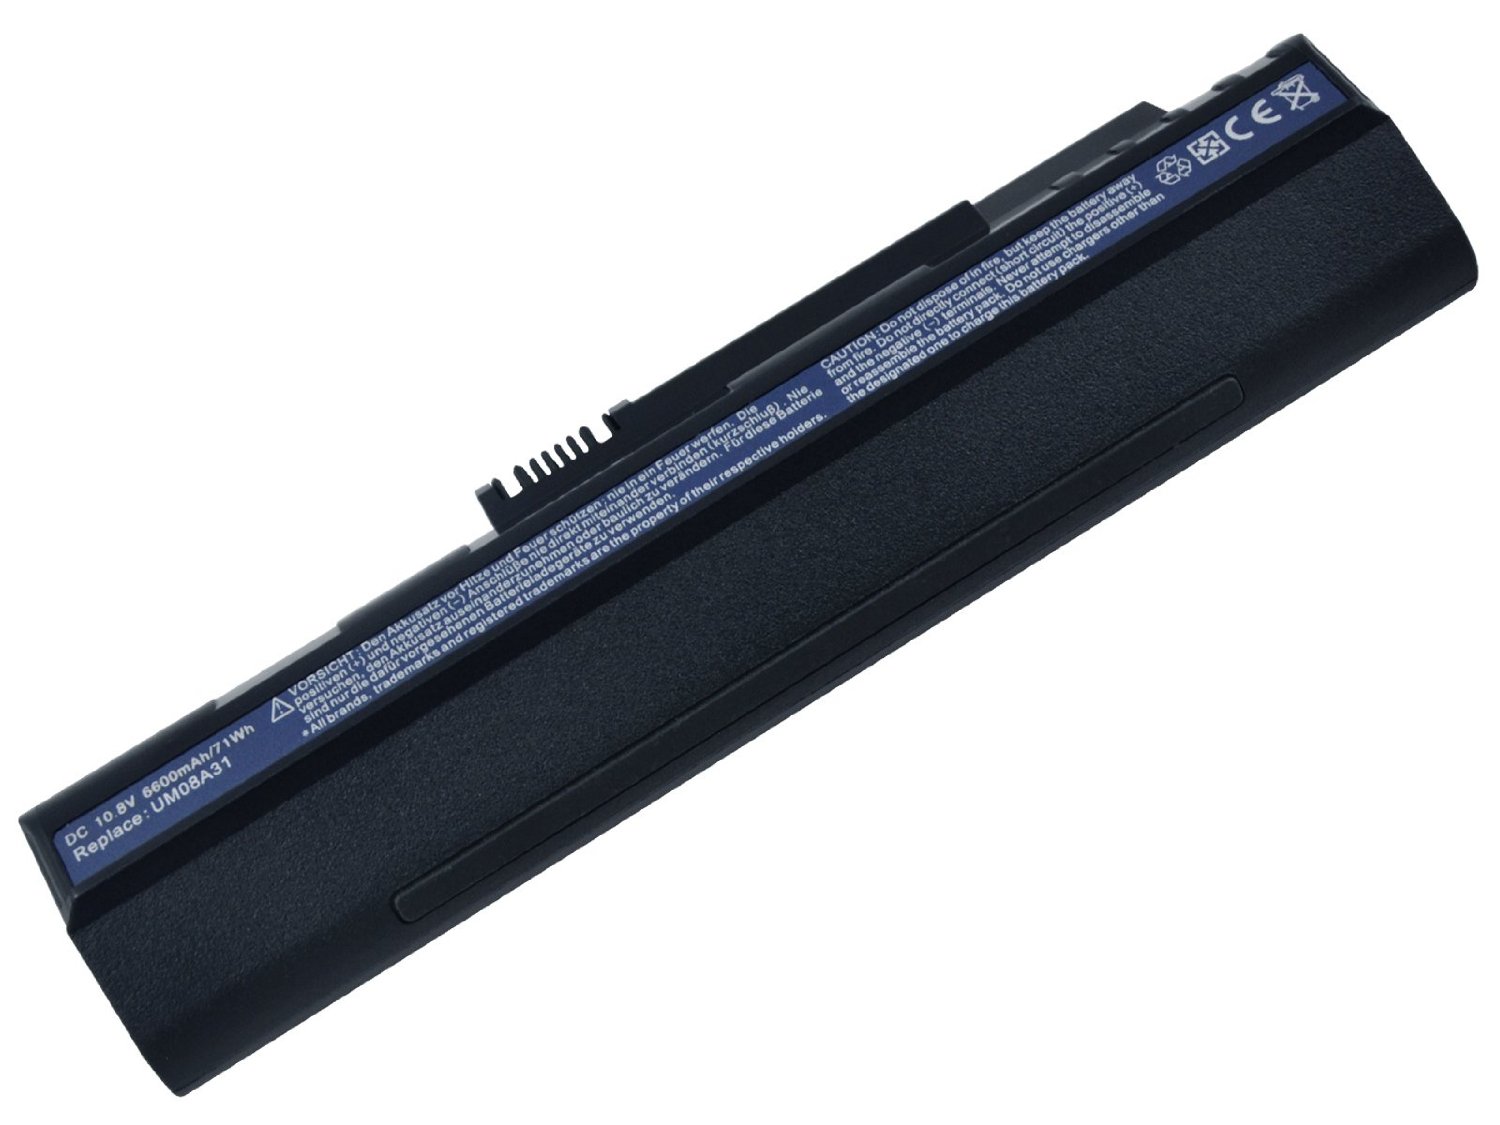 Acer Apsire one ZG5 9 Cell: -cell Laptop Battery for Acer Aspire One A110 A150 ZG5 Series